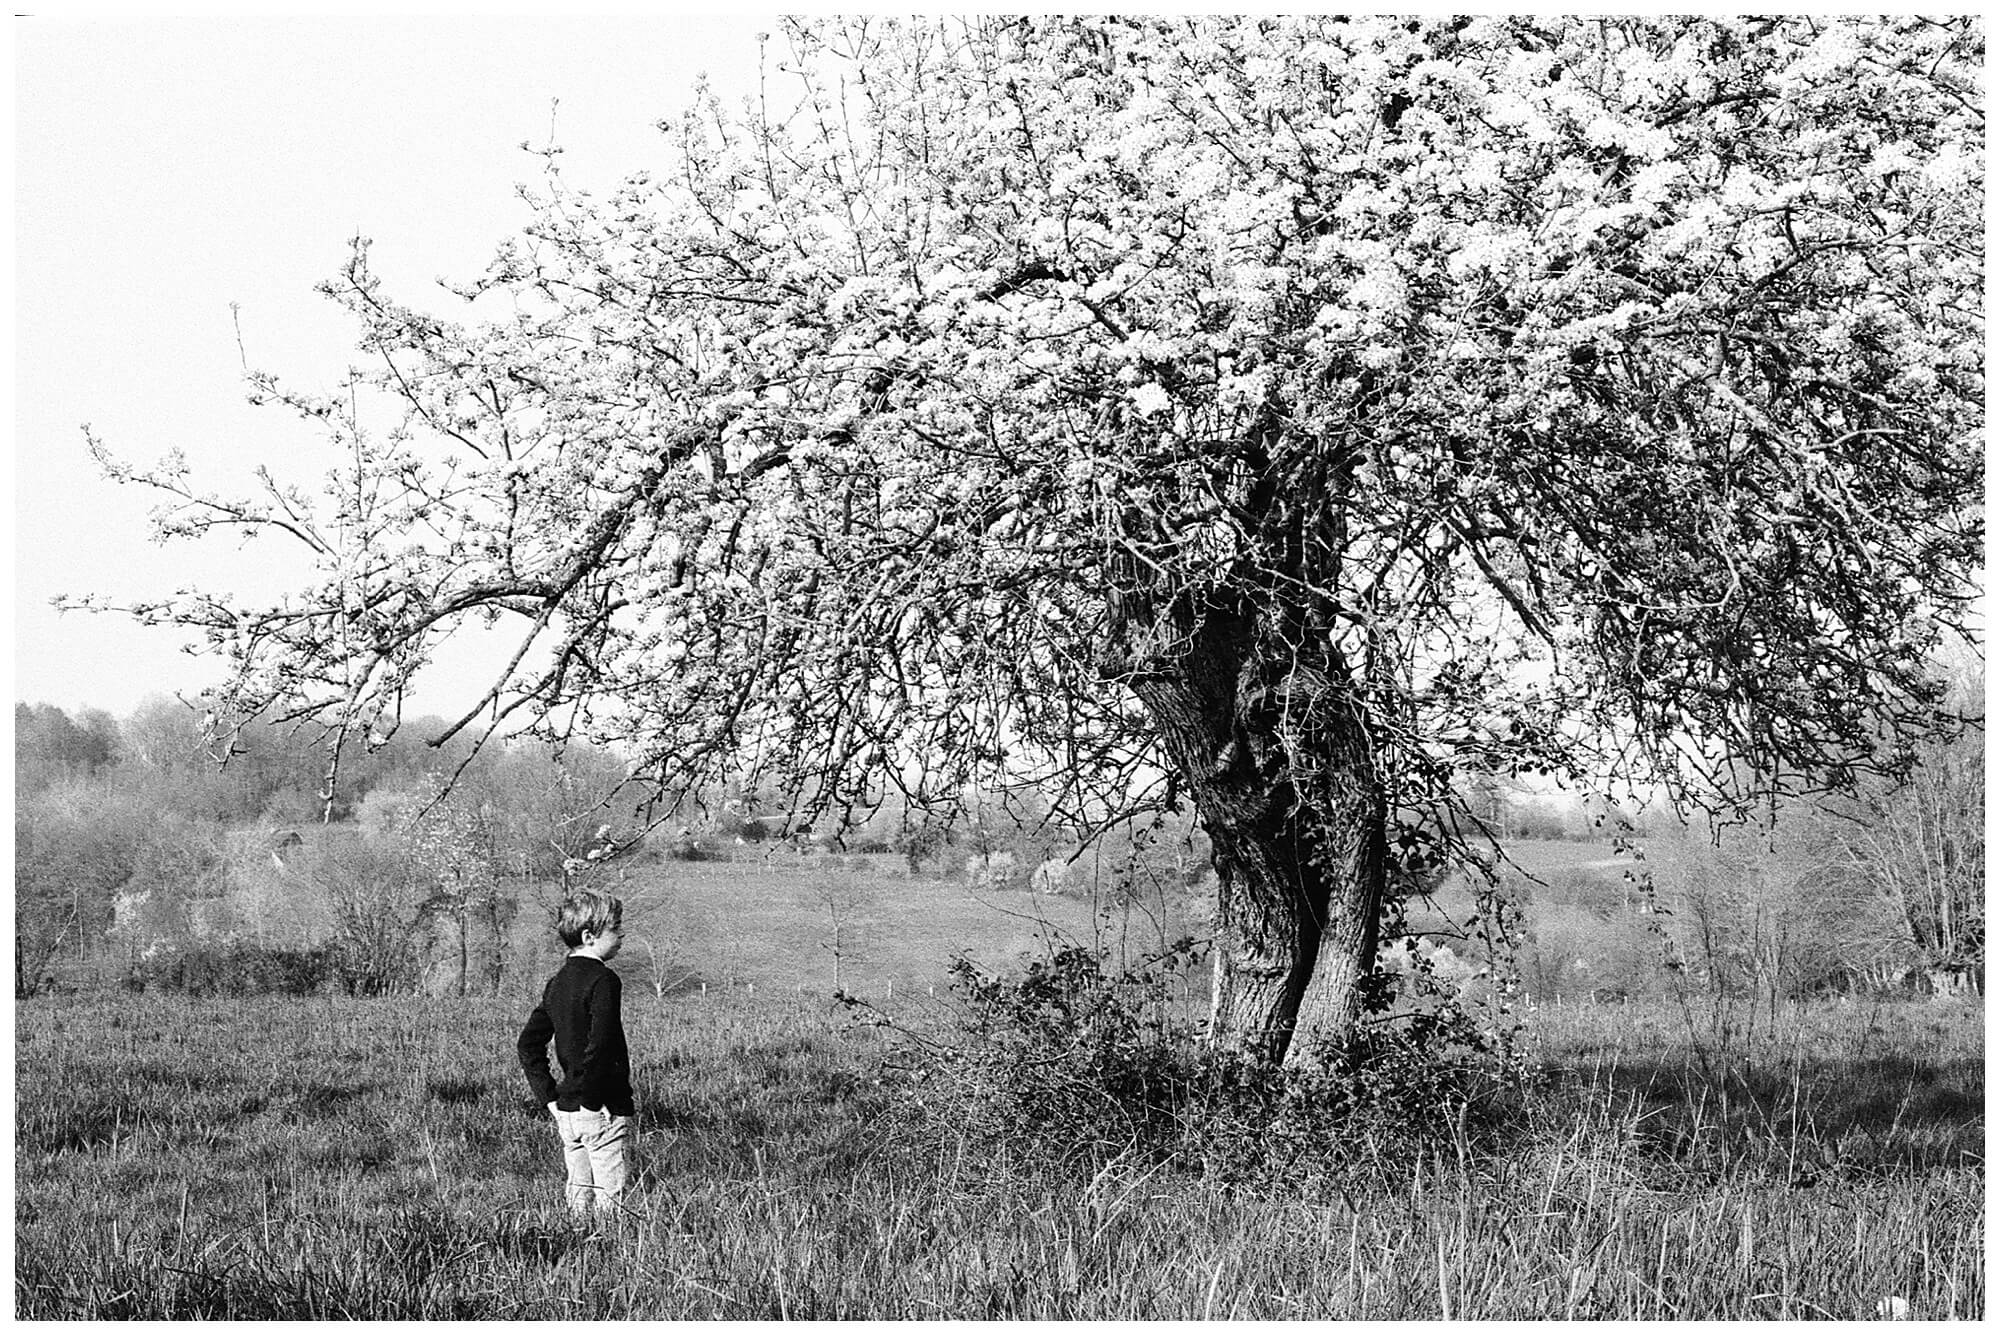 Black and white image. A young French boy stands in the shade of a flowering pear tree in the springtime during the COVID 19 quarantine in France.